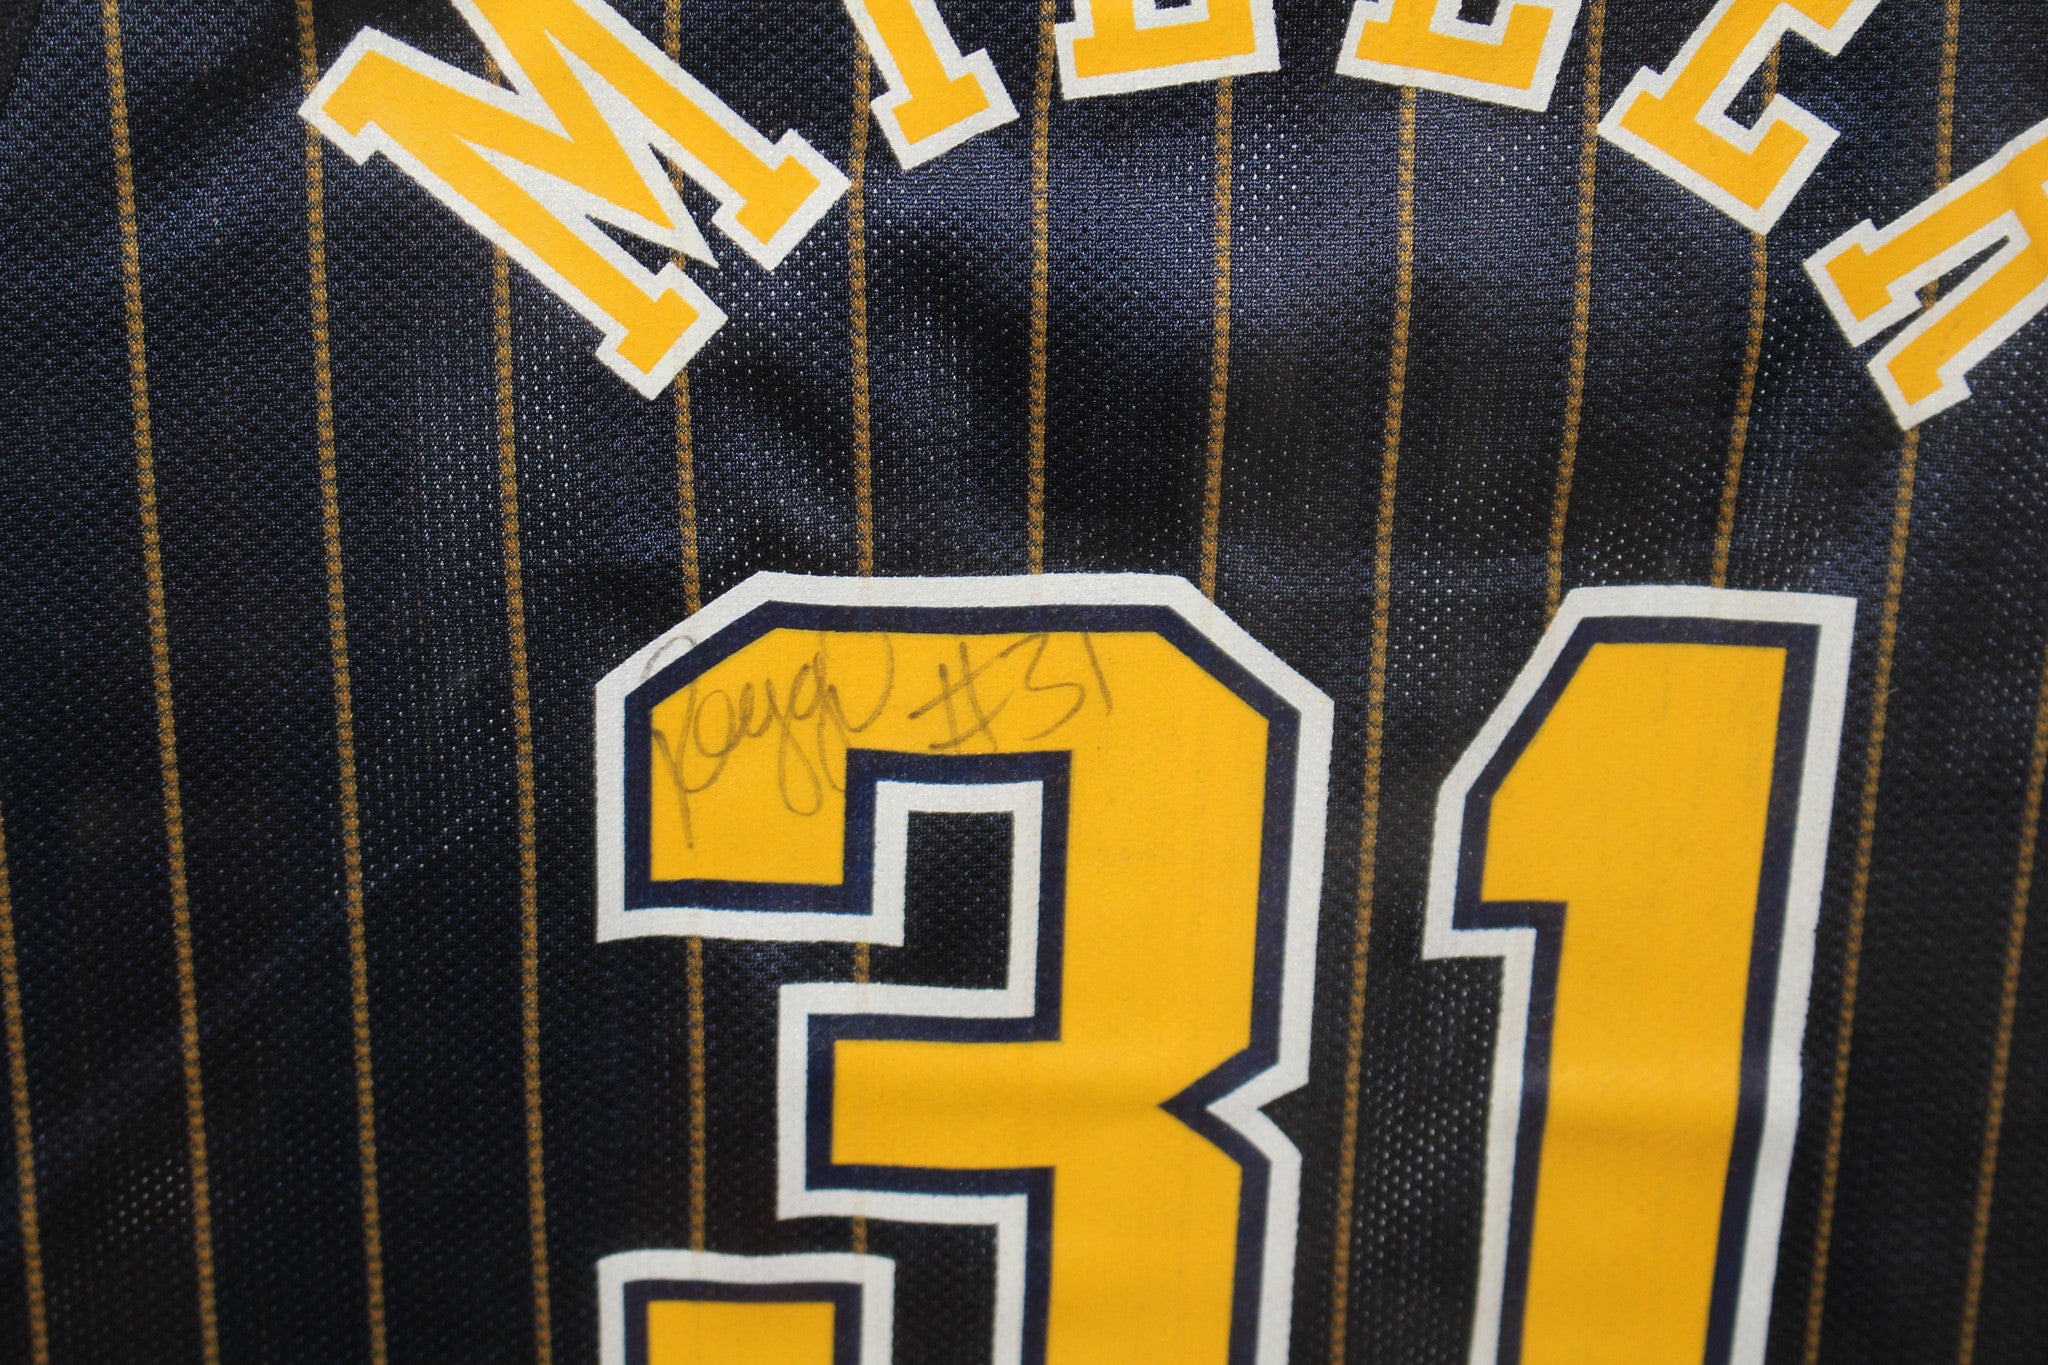 Reggie Miller Indiana Pacers Autographed Yellow Pinstripe Jersey –